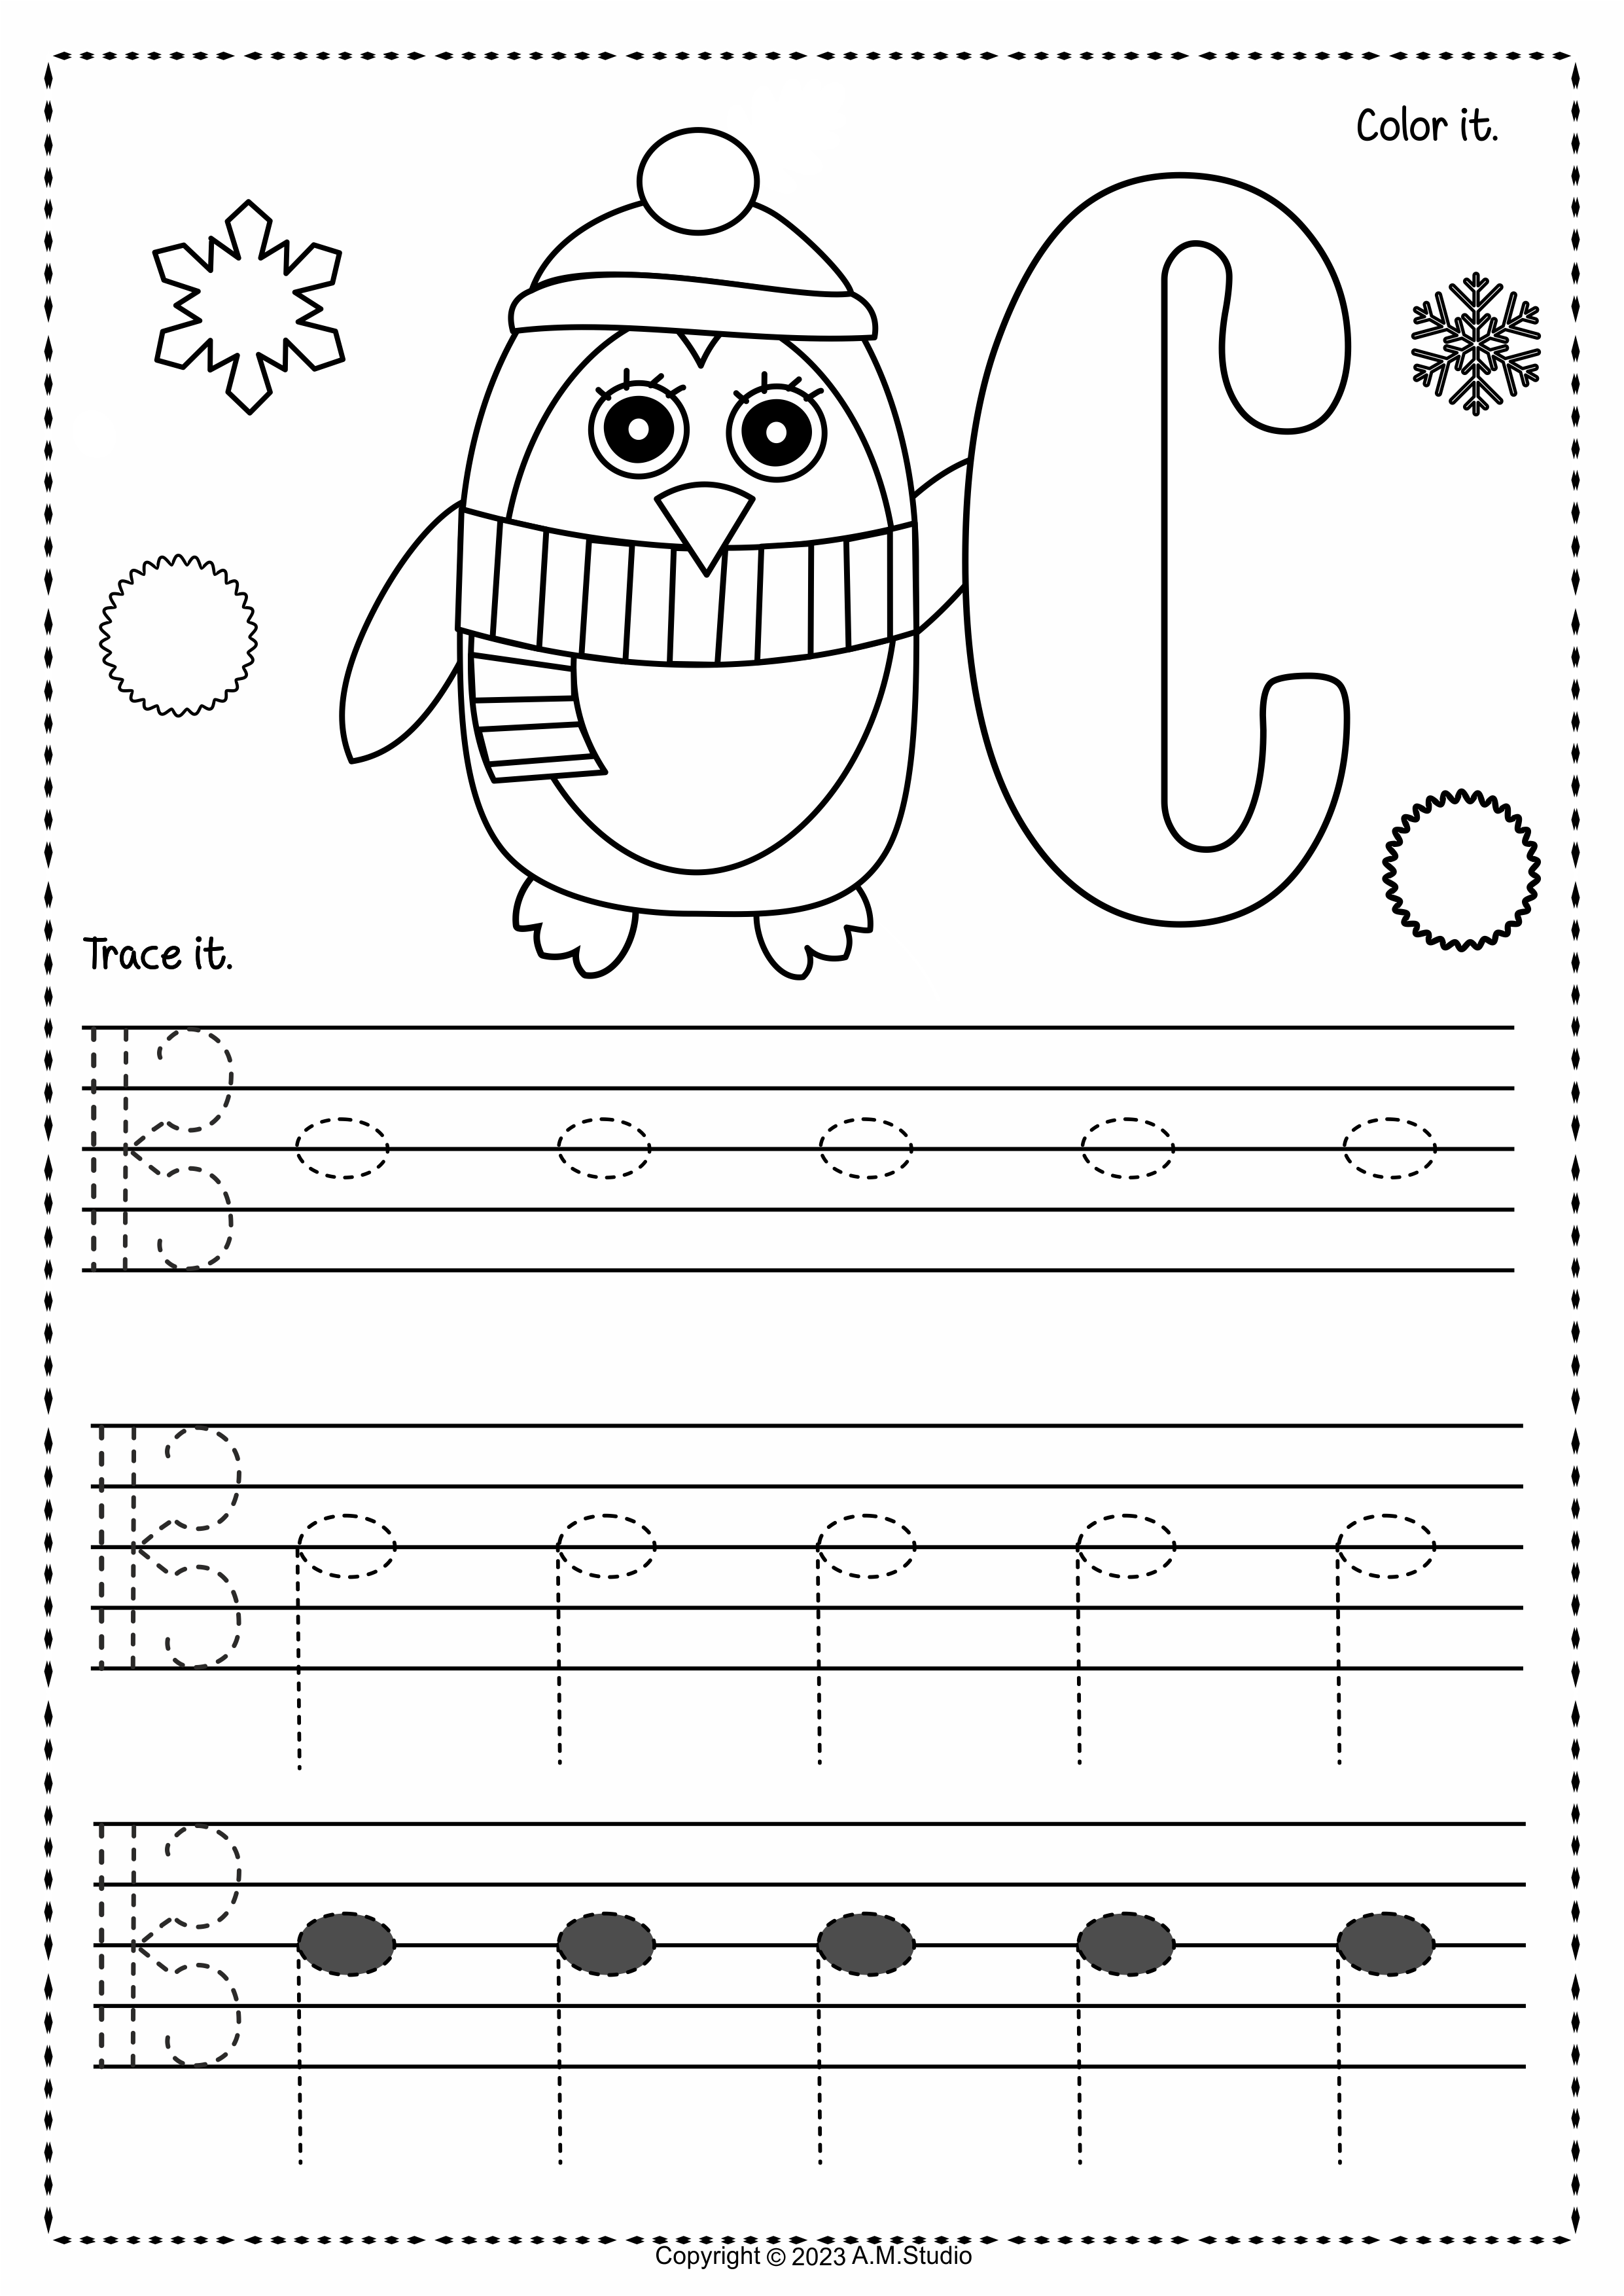 Alto Clef Tracing Music Notes Worksheets for Winter (img # 2)